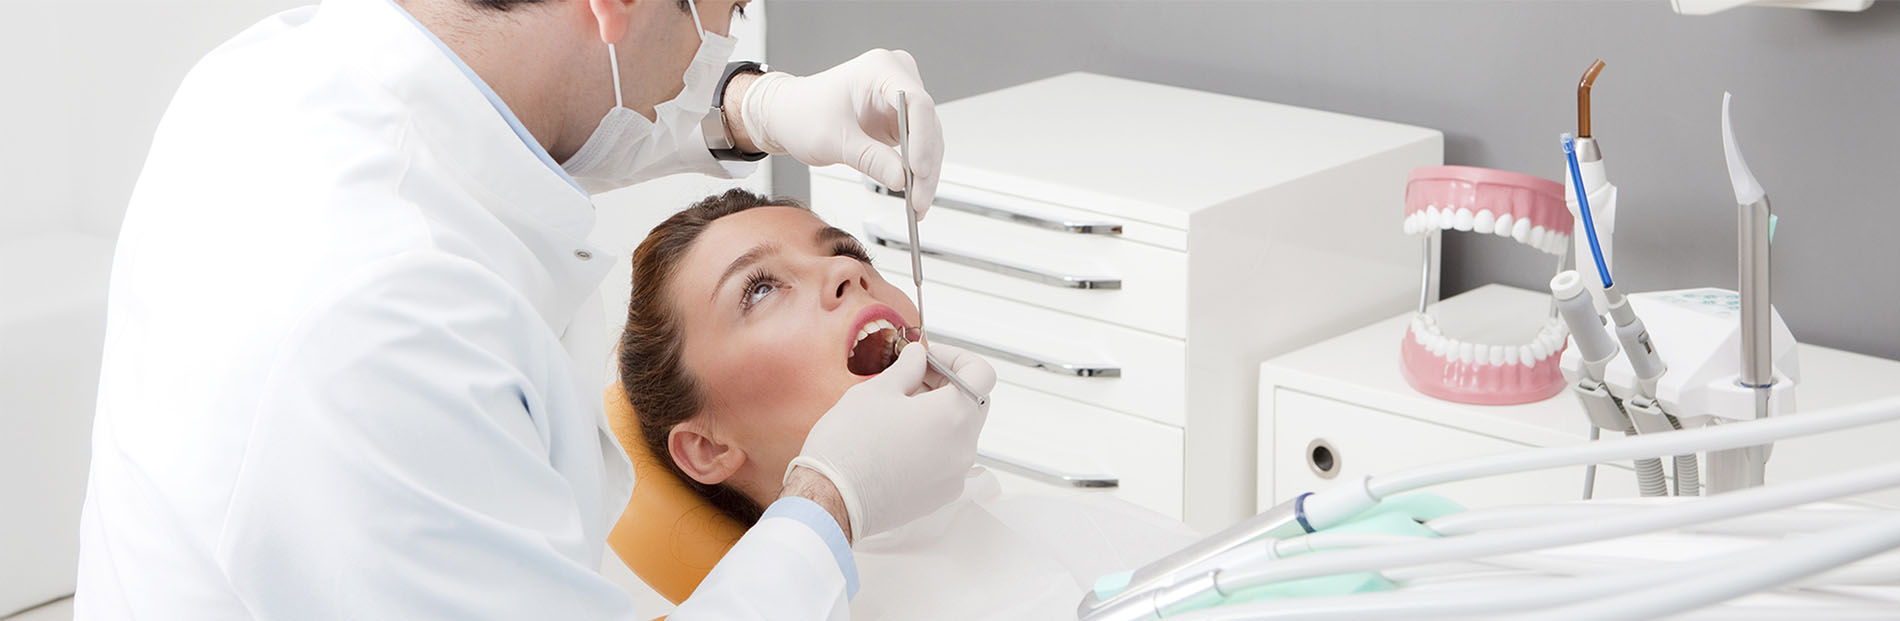 Root Canal Treatment Hyderabad Provides at Capture Life Dental Care